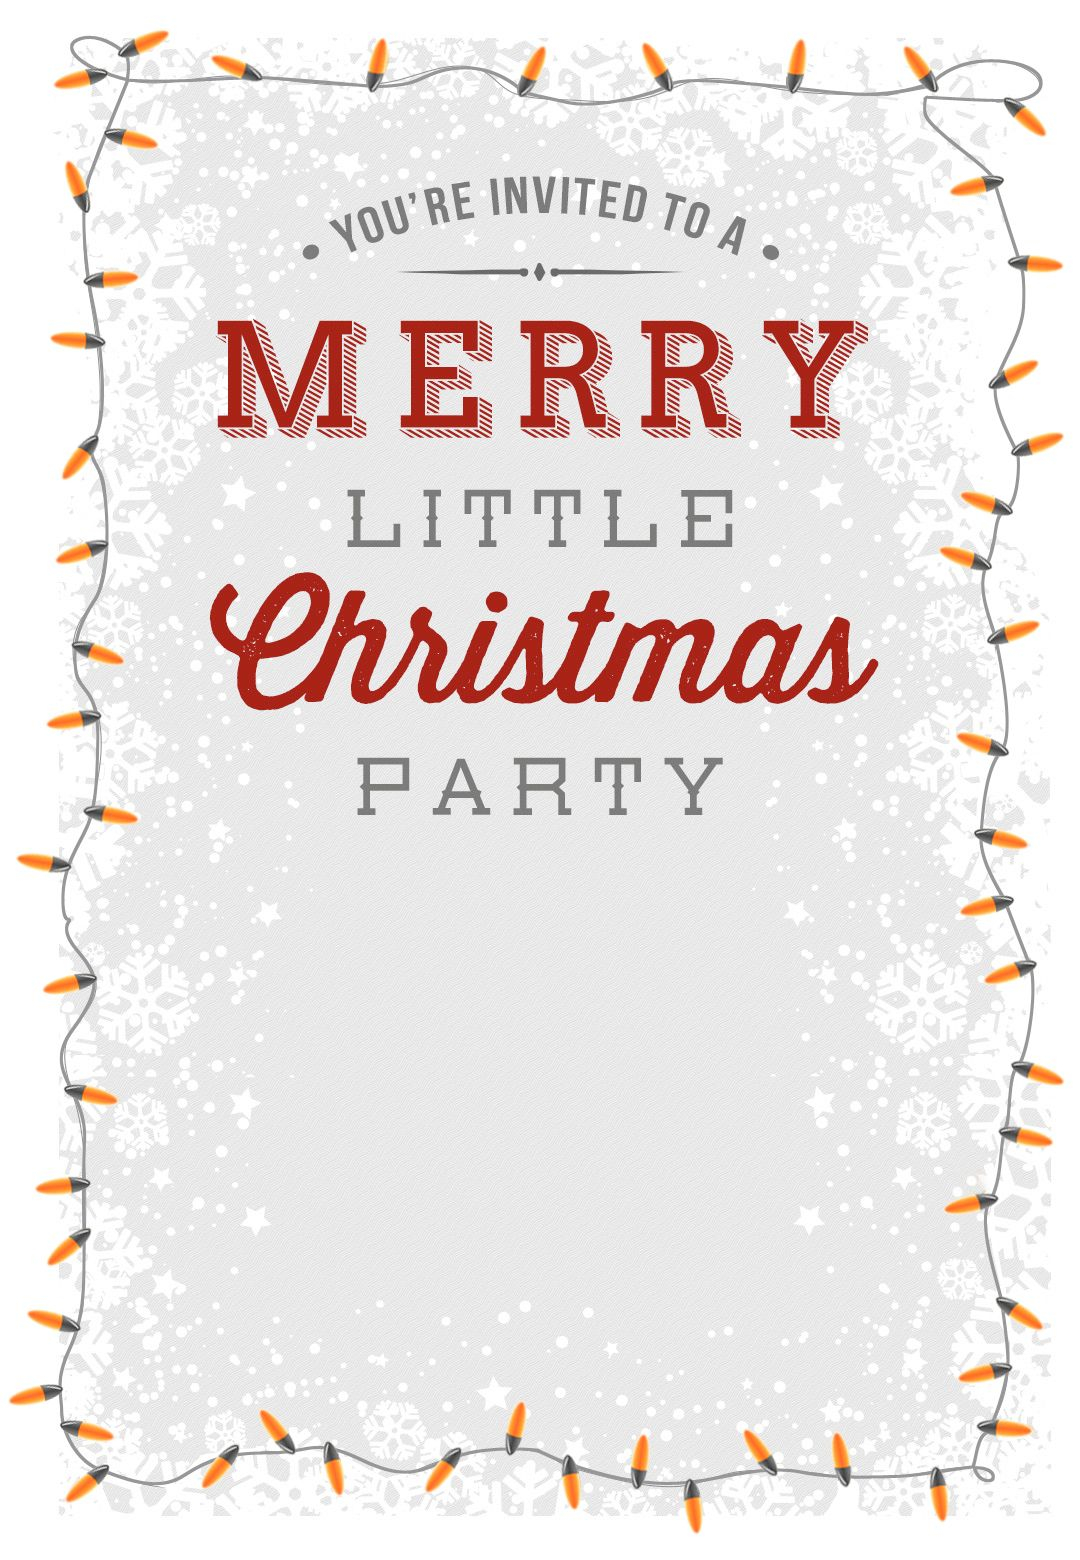 A Merry Little Party Free Printable Christmas Invitation Template within sizing 1080 X 1560